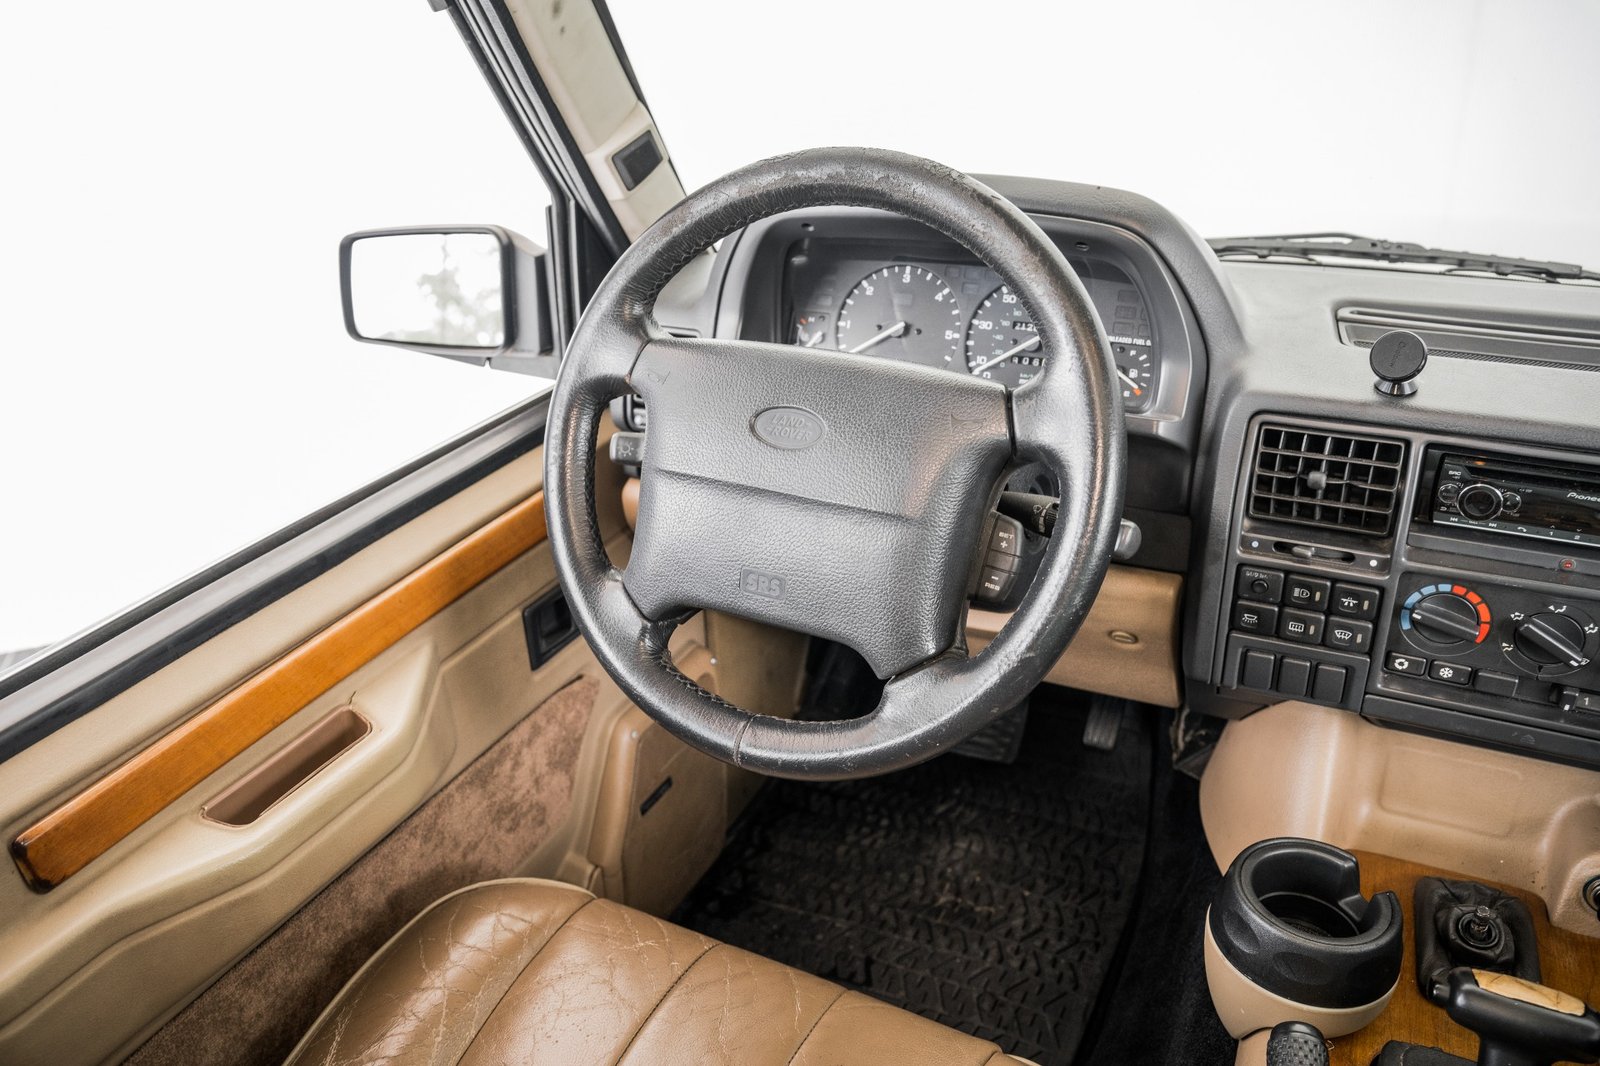 Used 1995 RANGE ROVER COUNTY CLASSIC (16)